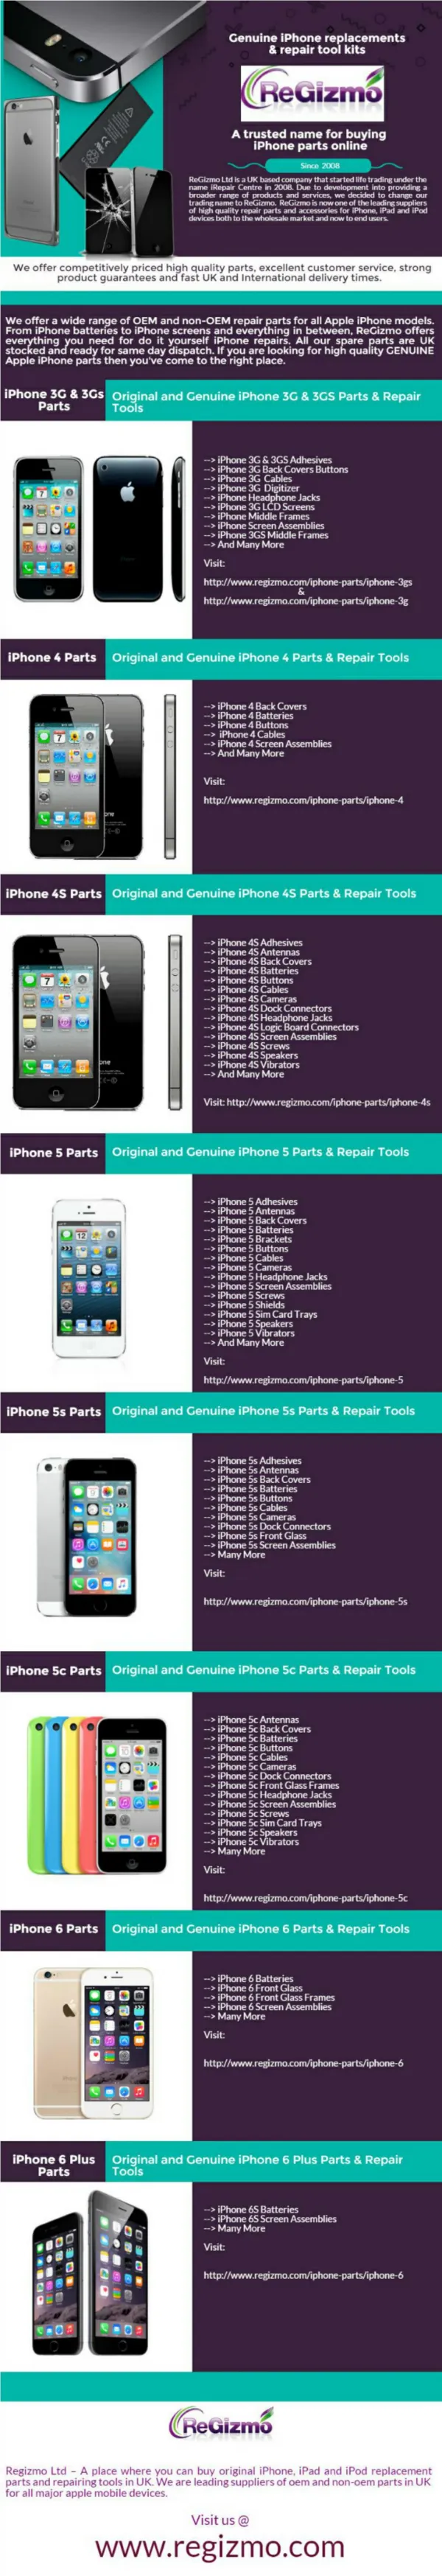 ReGizmo – Trusted name for buying iphone parts online in UK